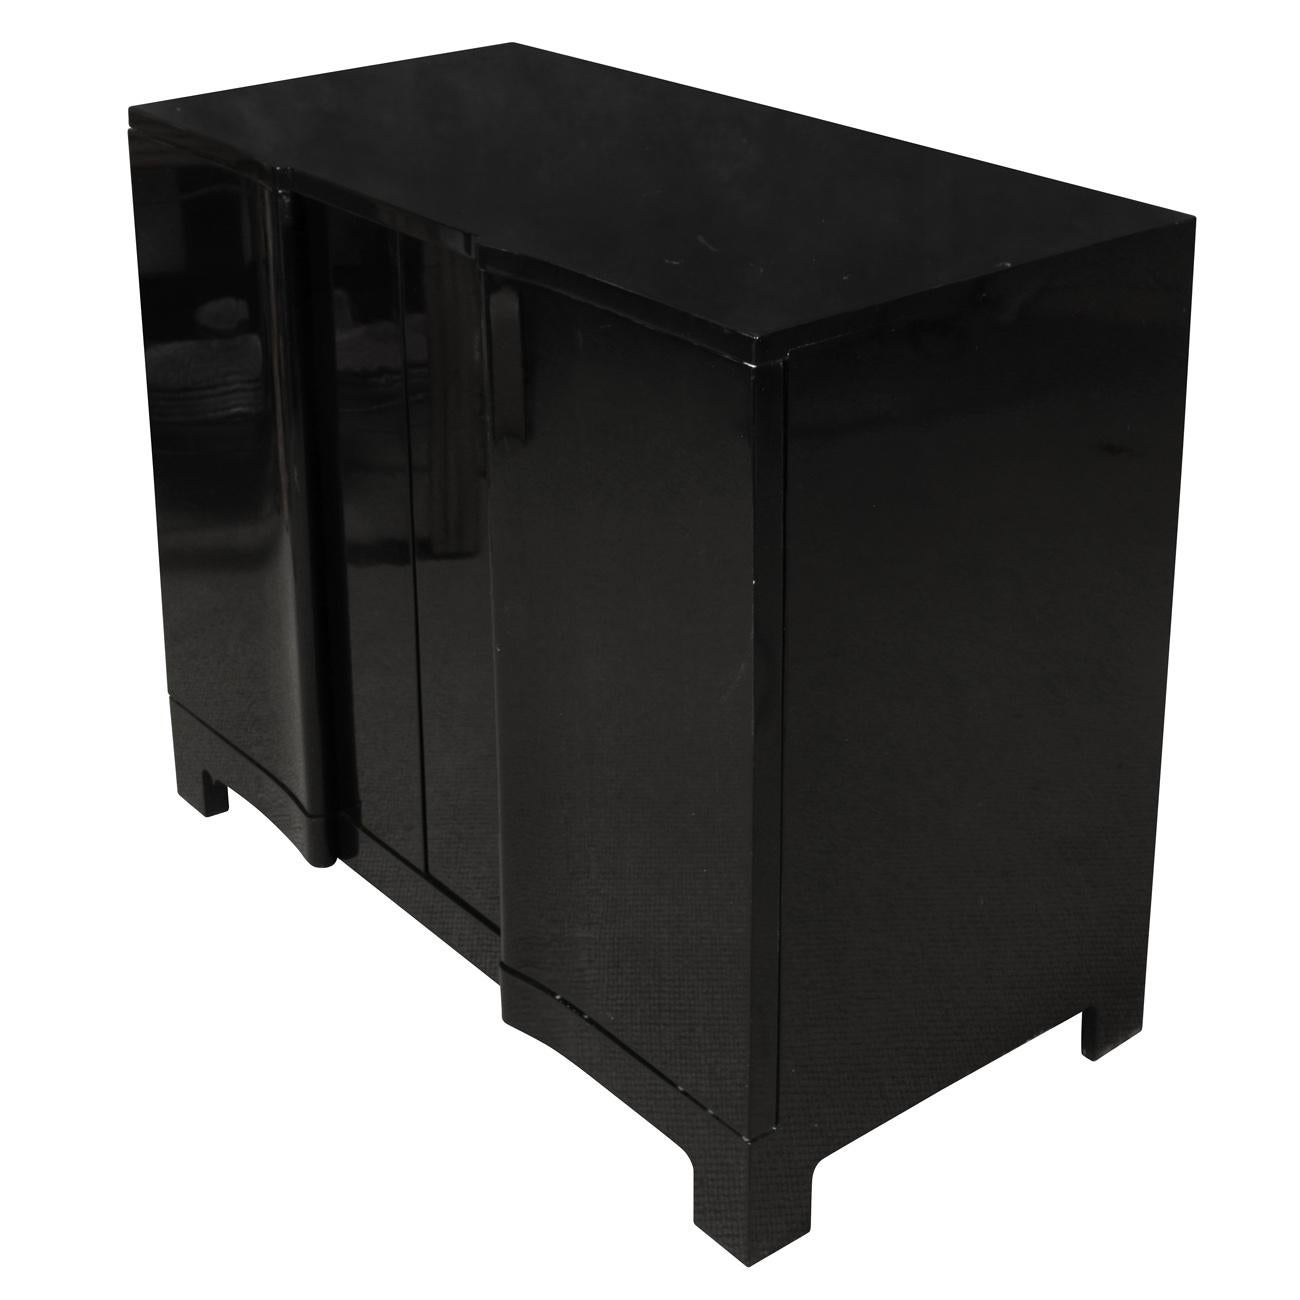 Modern black lacquered cabinet with curved front appearing as three doors. Cabinet has two doors that swing open to reveal three shelves for storage.